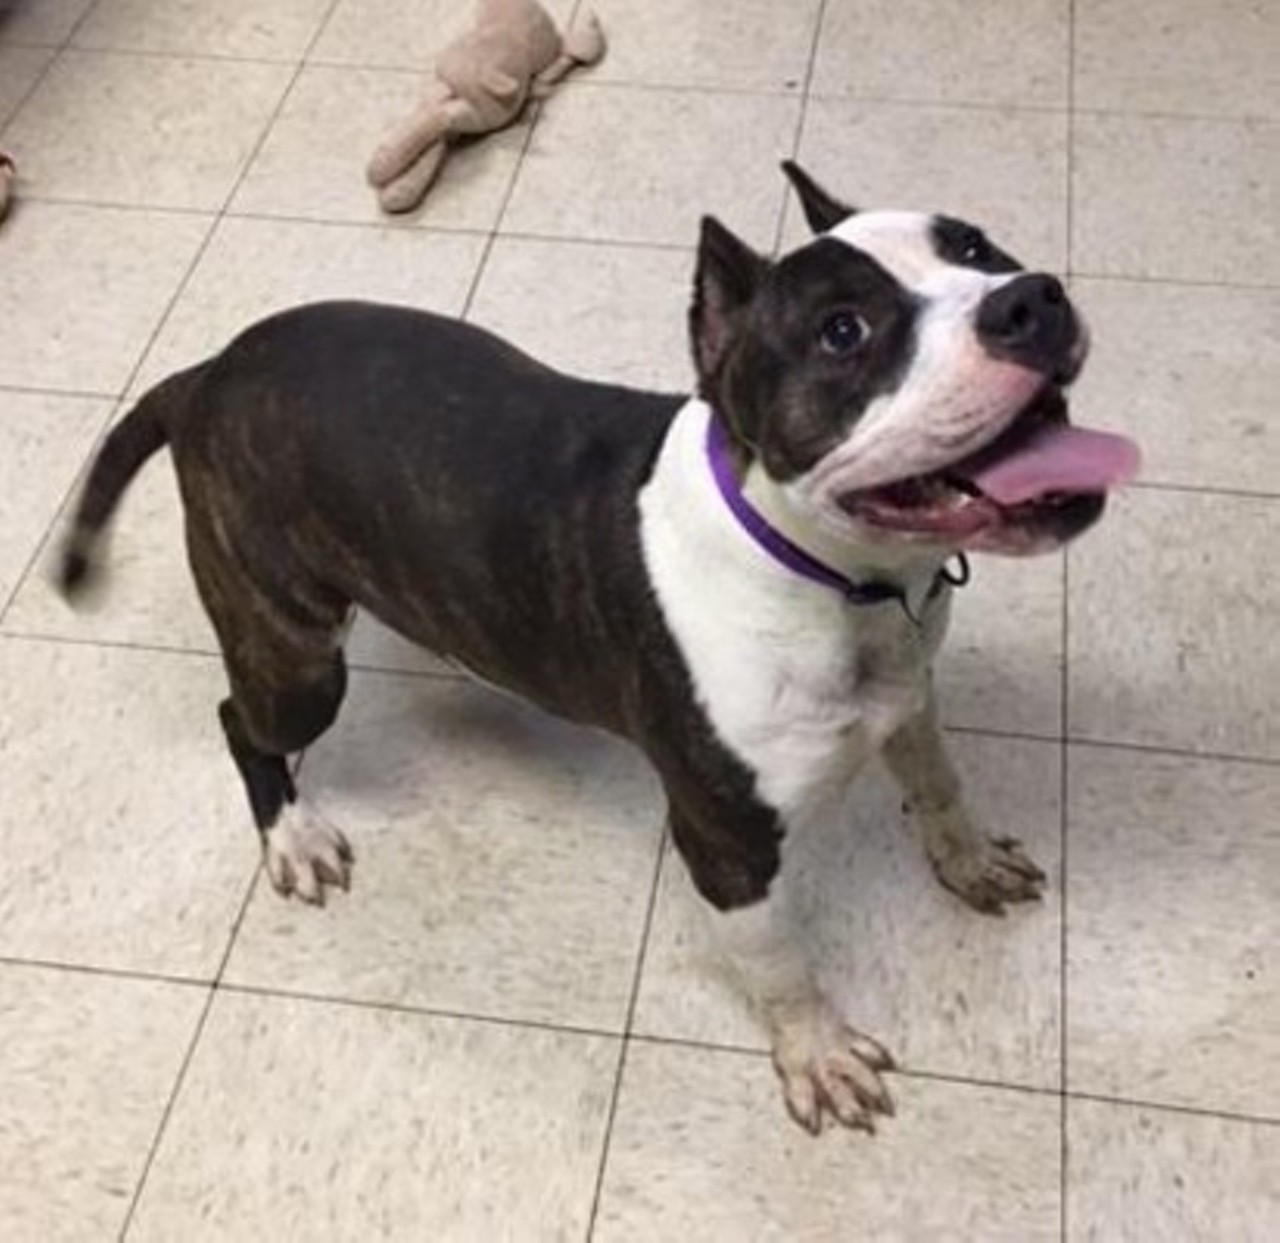  Belle
9-month-old, Terrier/American Pit Bull mix
Photo via Cleveland Animal Care & Control